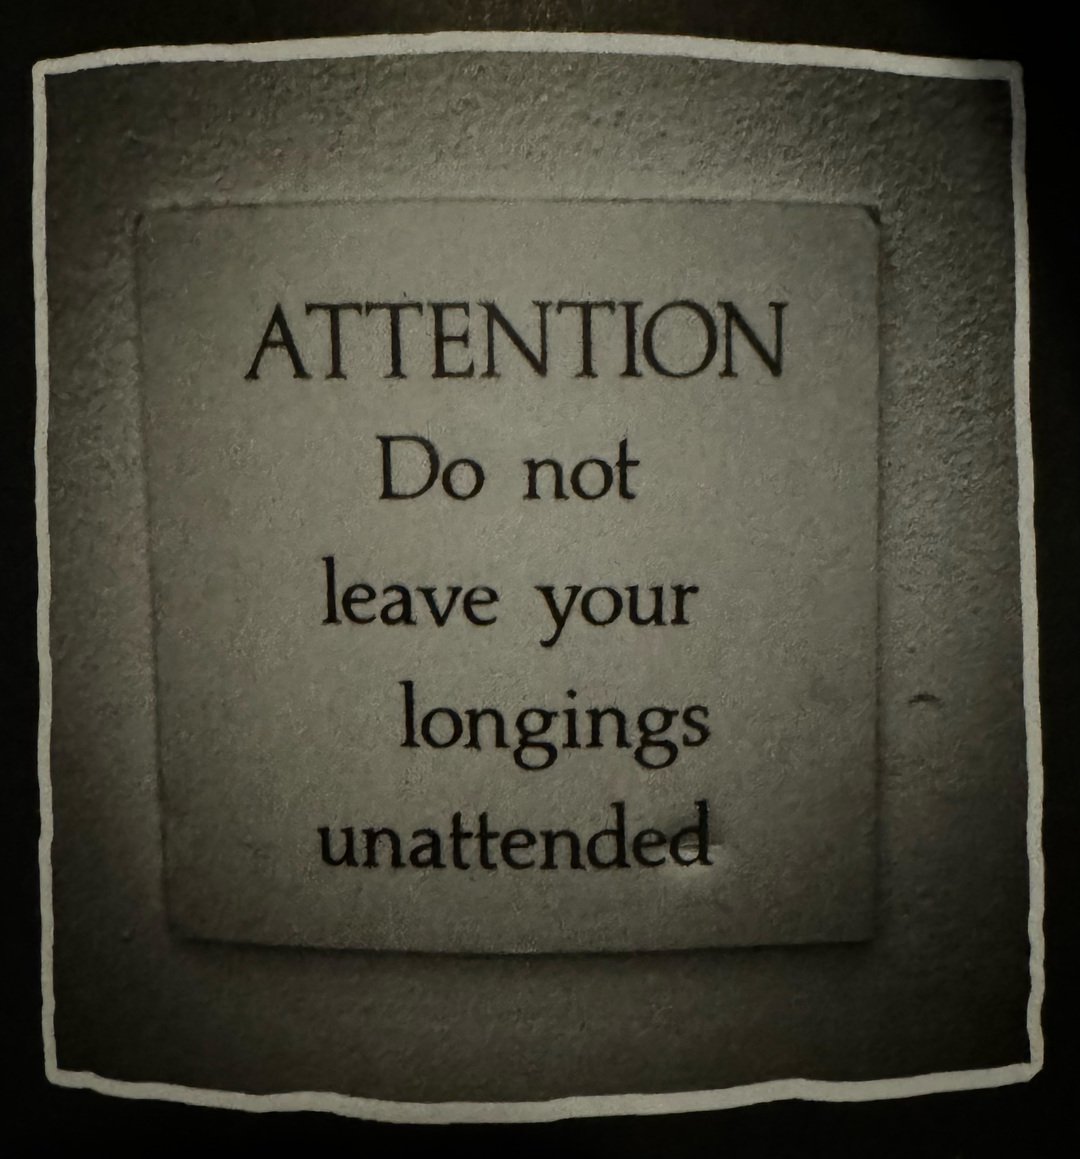 ATTENTION Do not leave your longings unattended